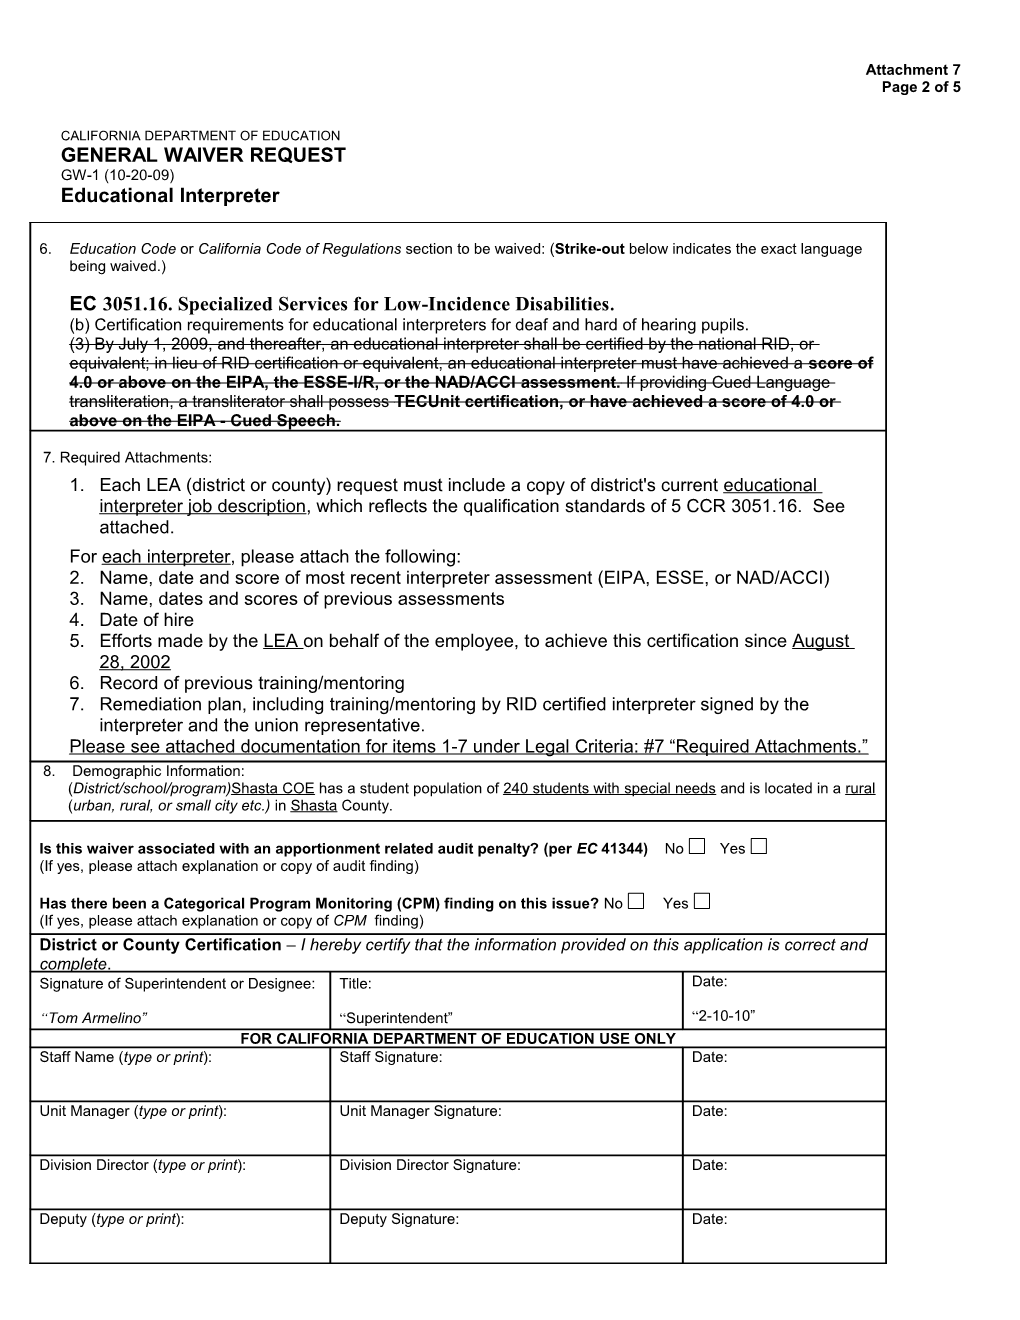 May 2010 Waiver Item W36 Attachment 7 - Meeting Agendas (Ca State Board of Education)